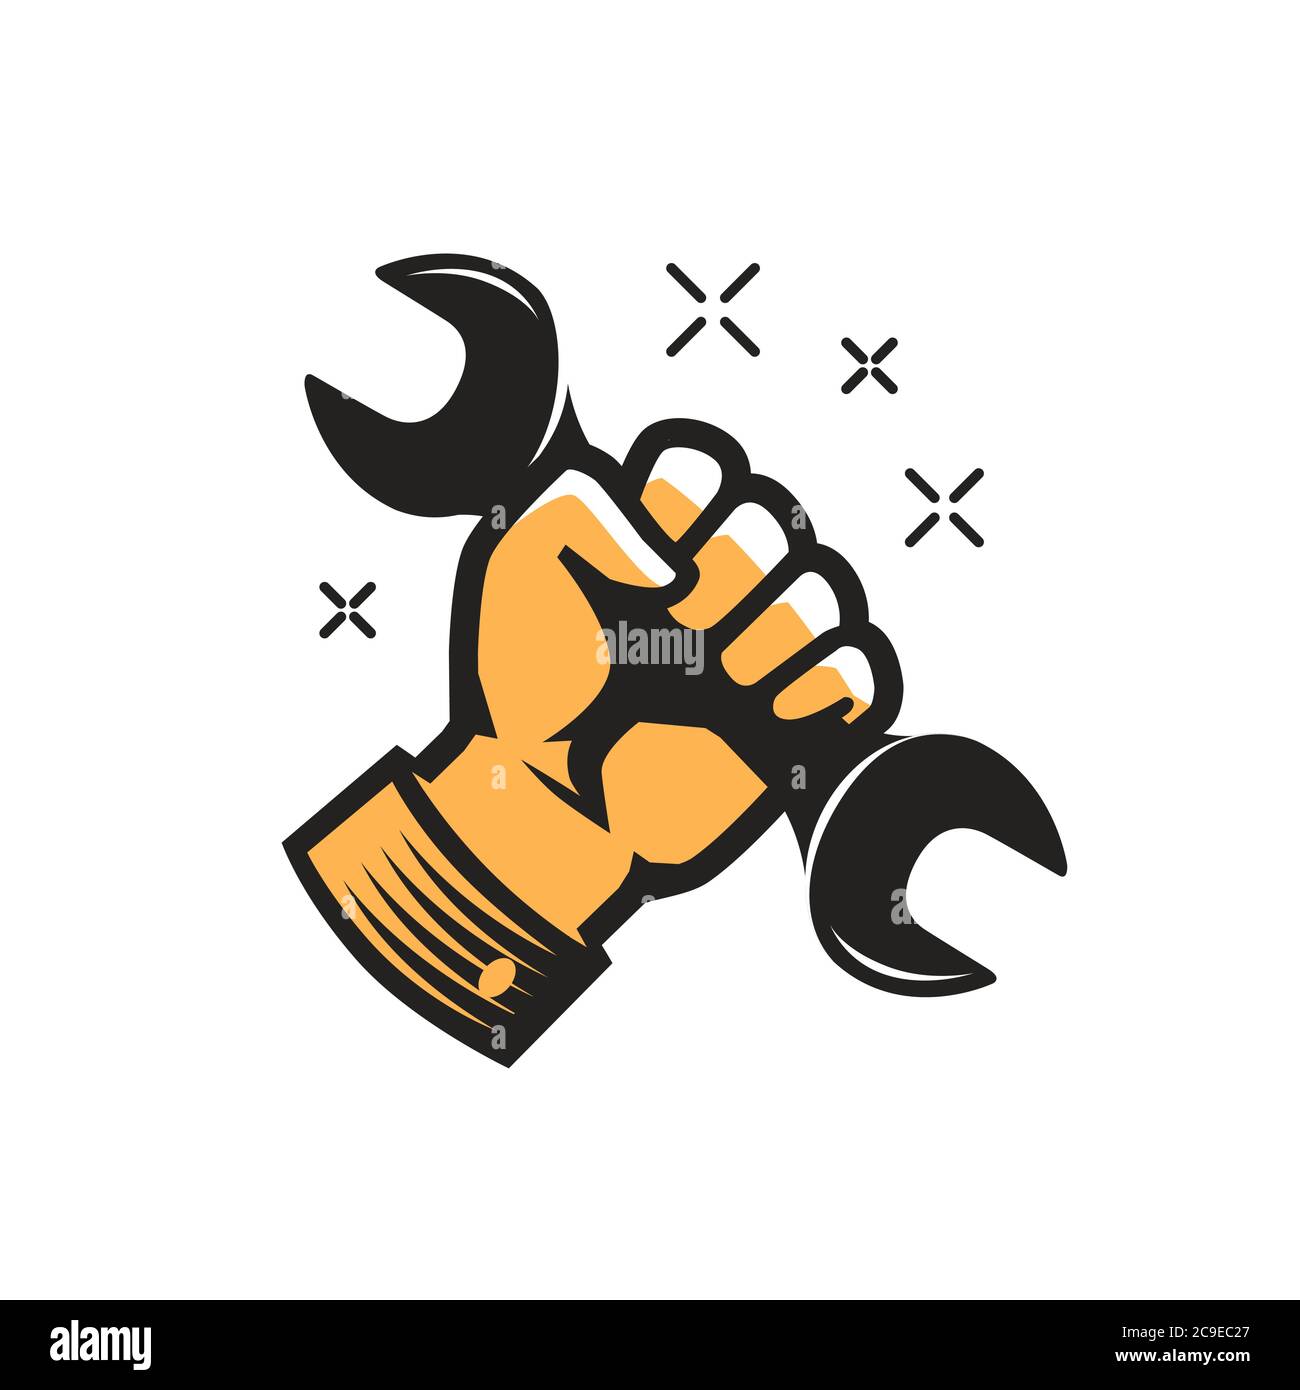 Wrench in hand symbol. Repairs, maintenance, construction concept Stock Vector